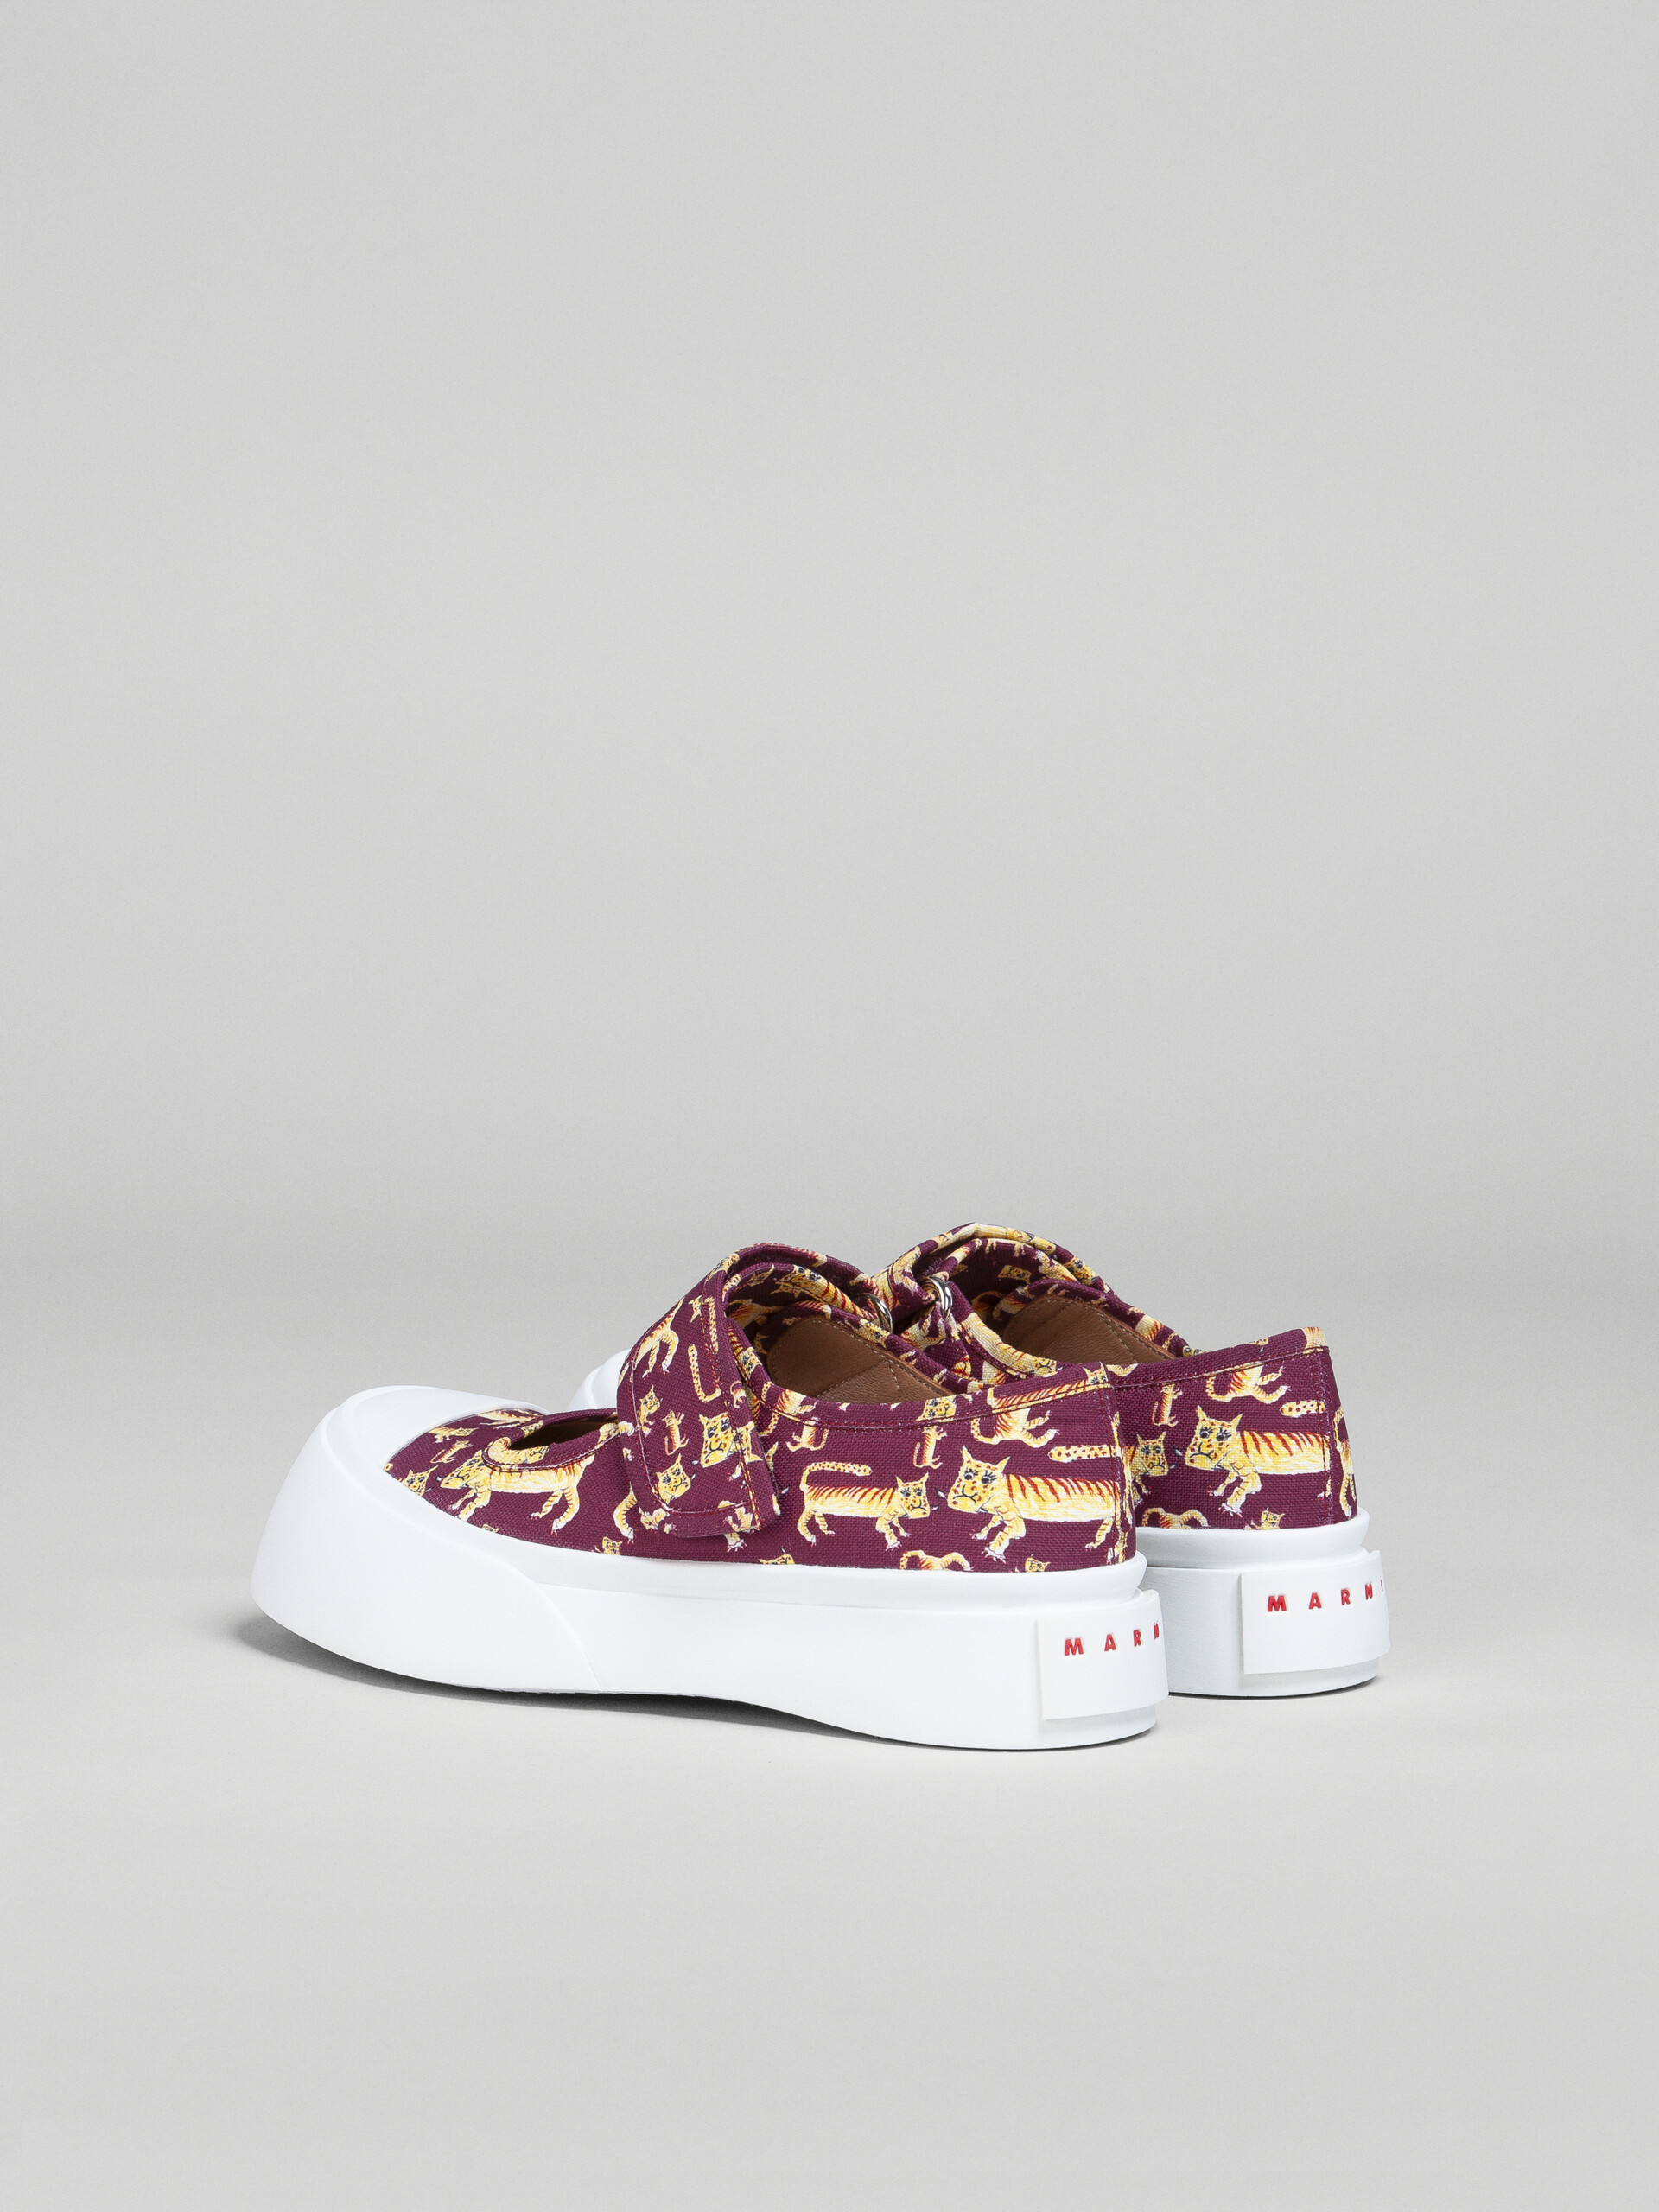 Tiger print canvas PABLO Mary-Jane sneaker - Sneakers - Image 3